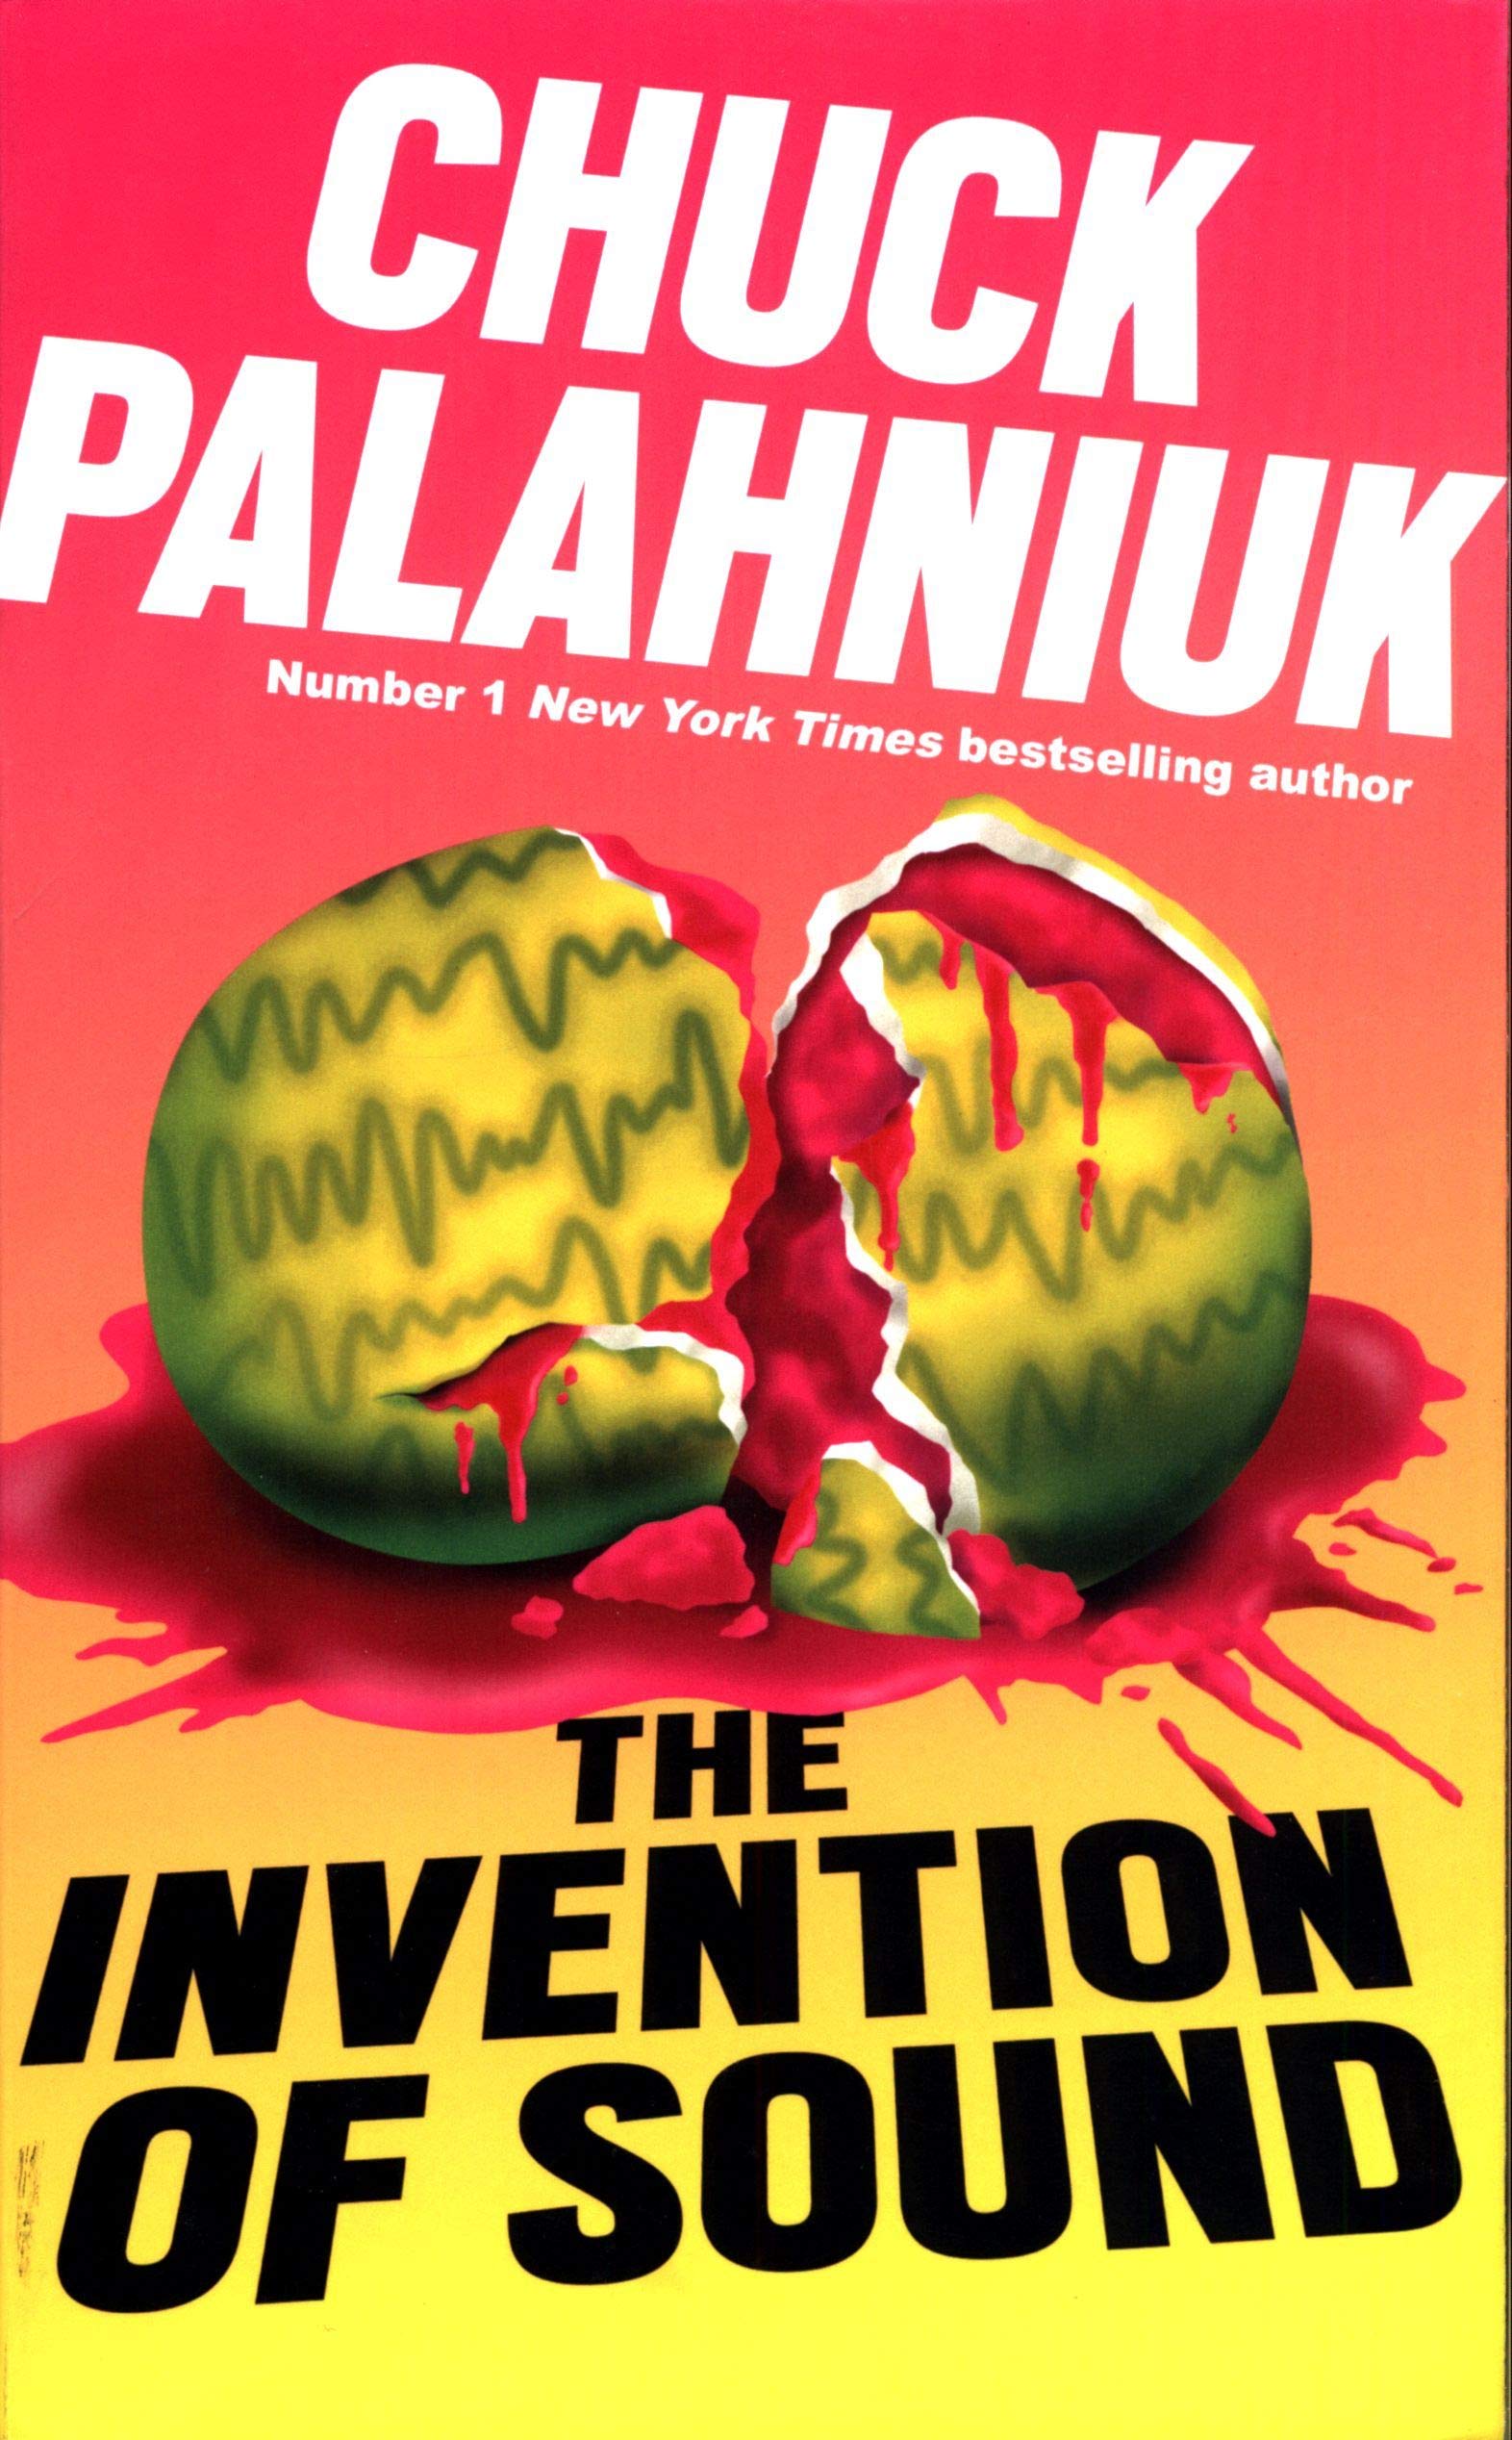 The Invention of Sound | Chuck Palahniuk